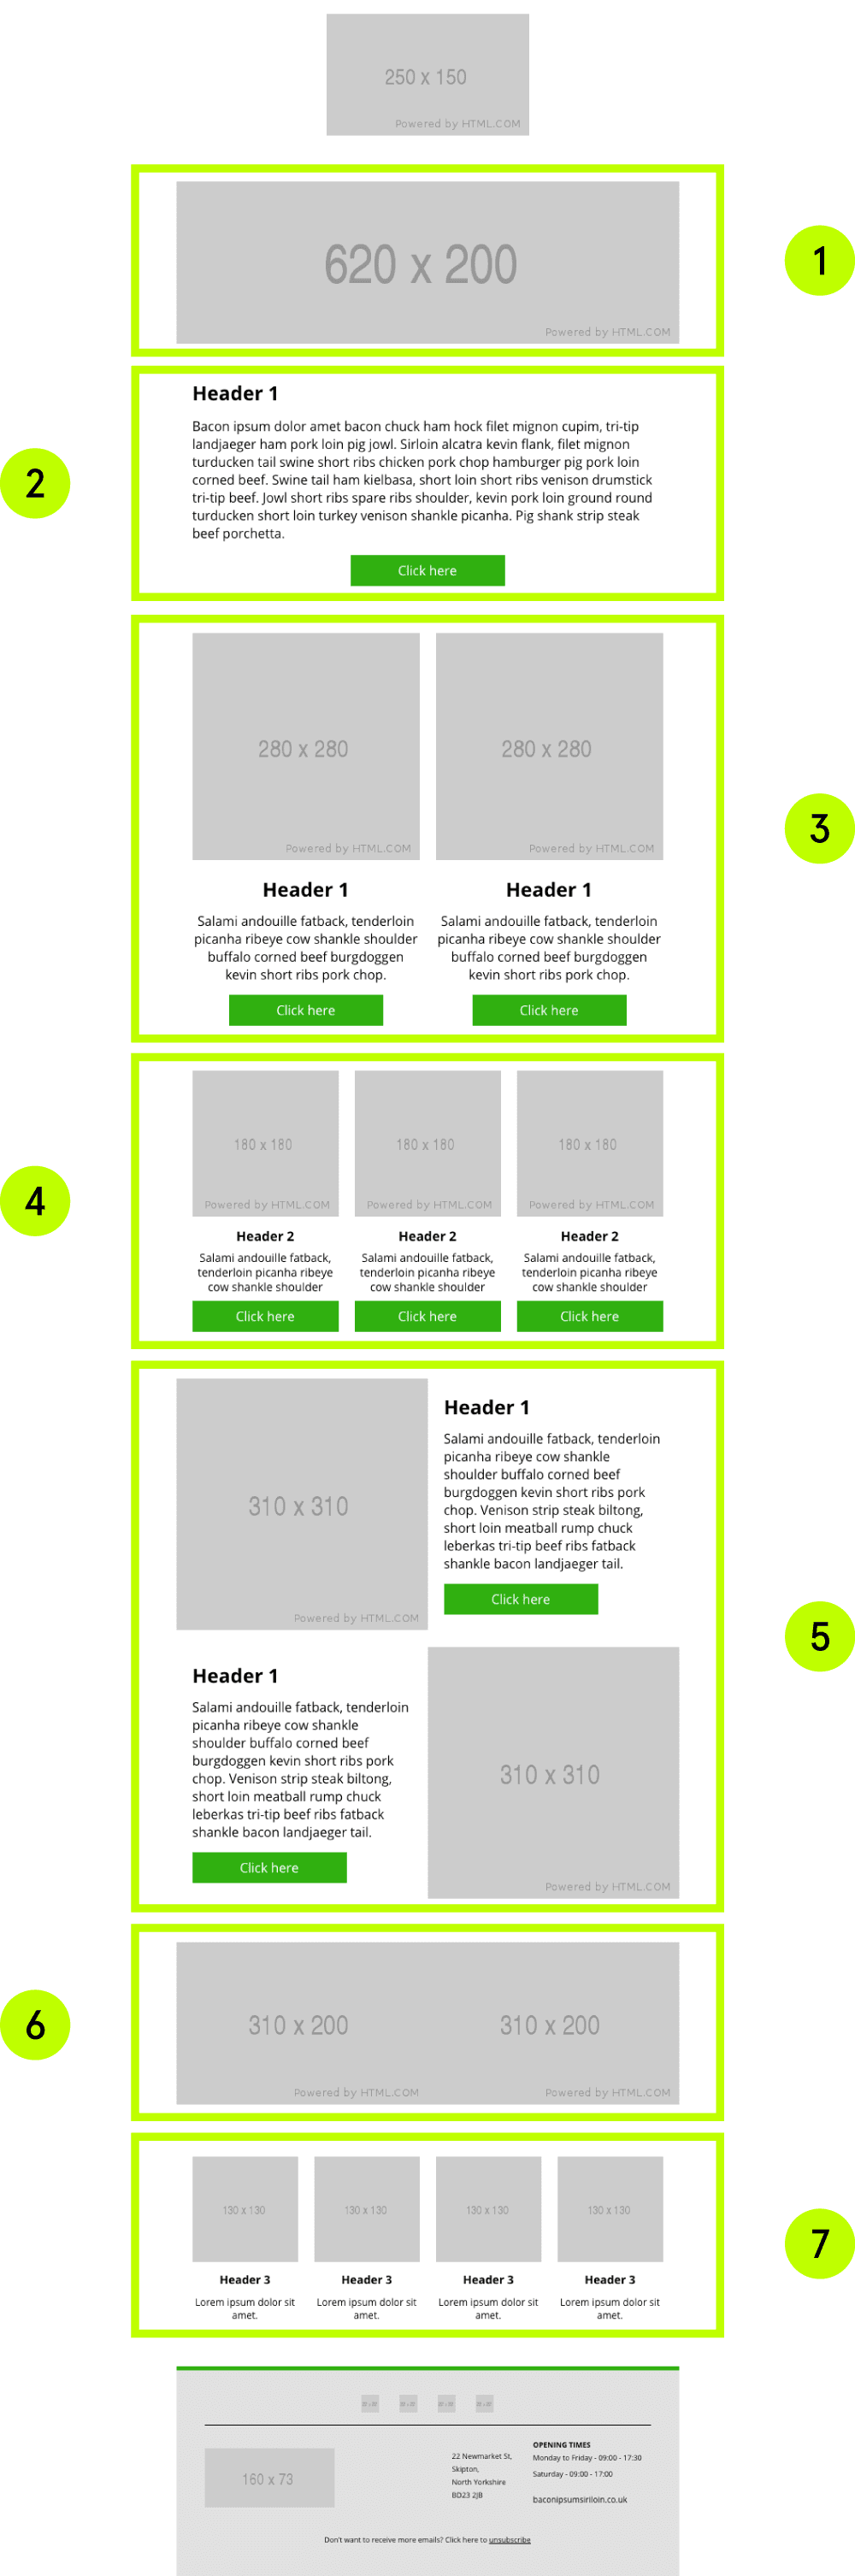 Email template module examples